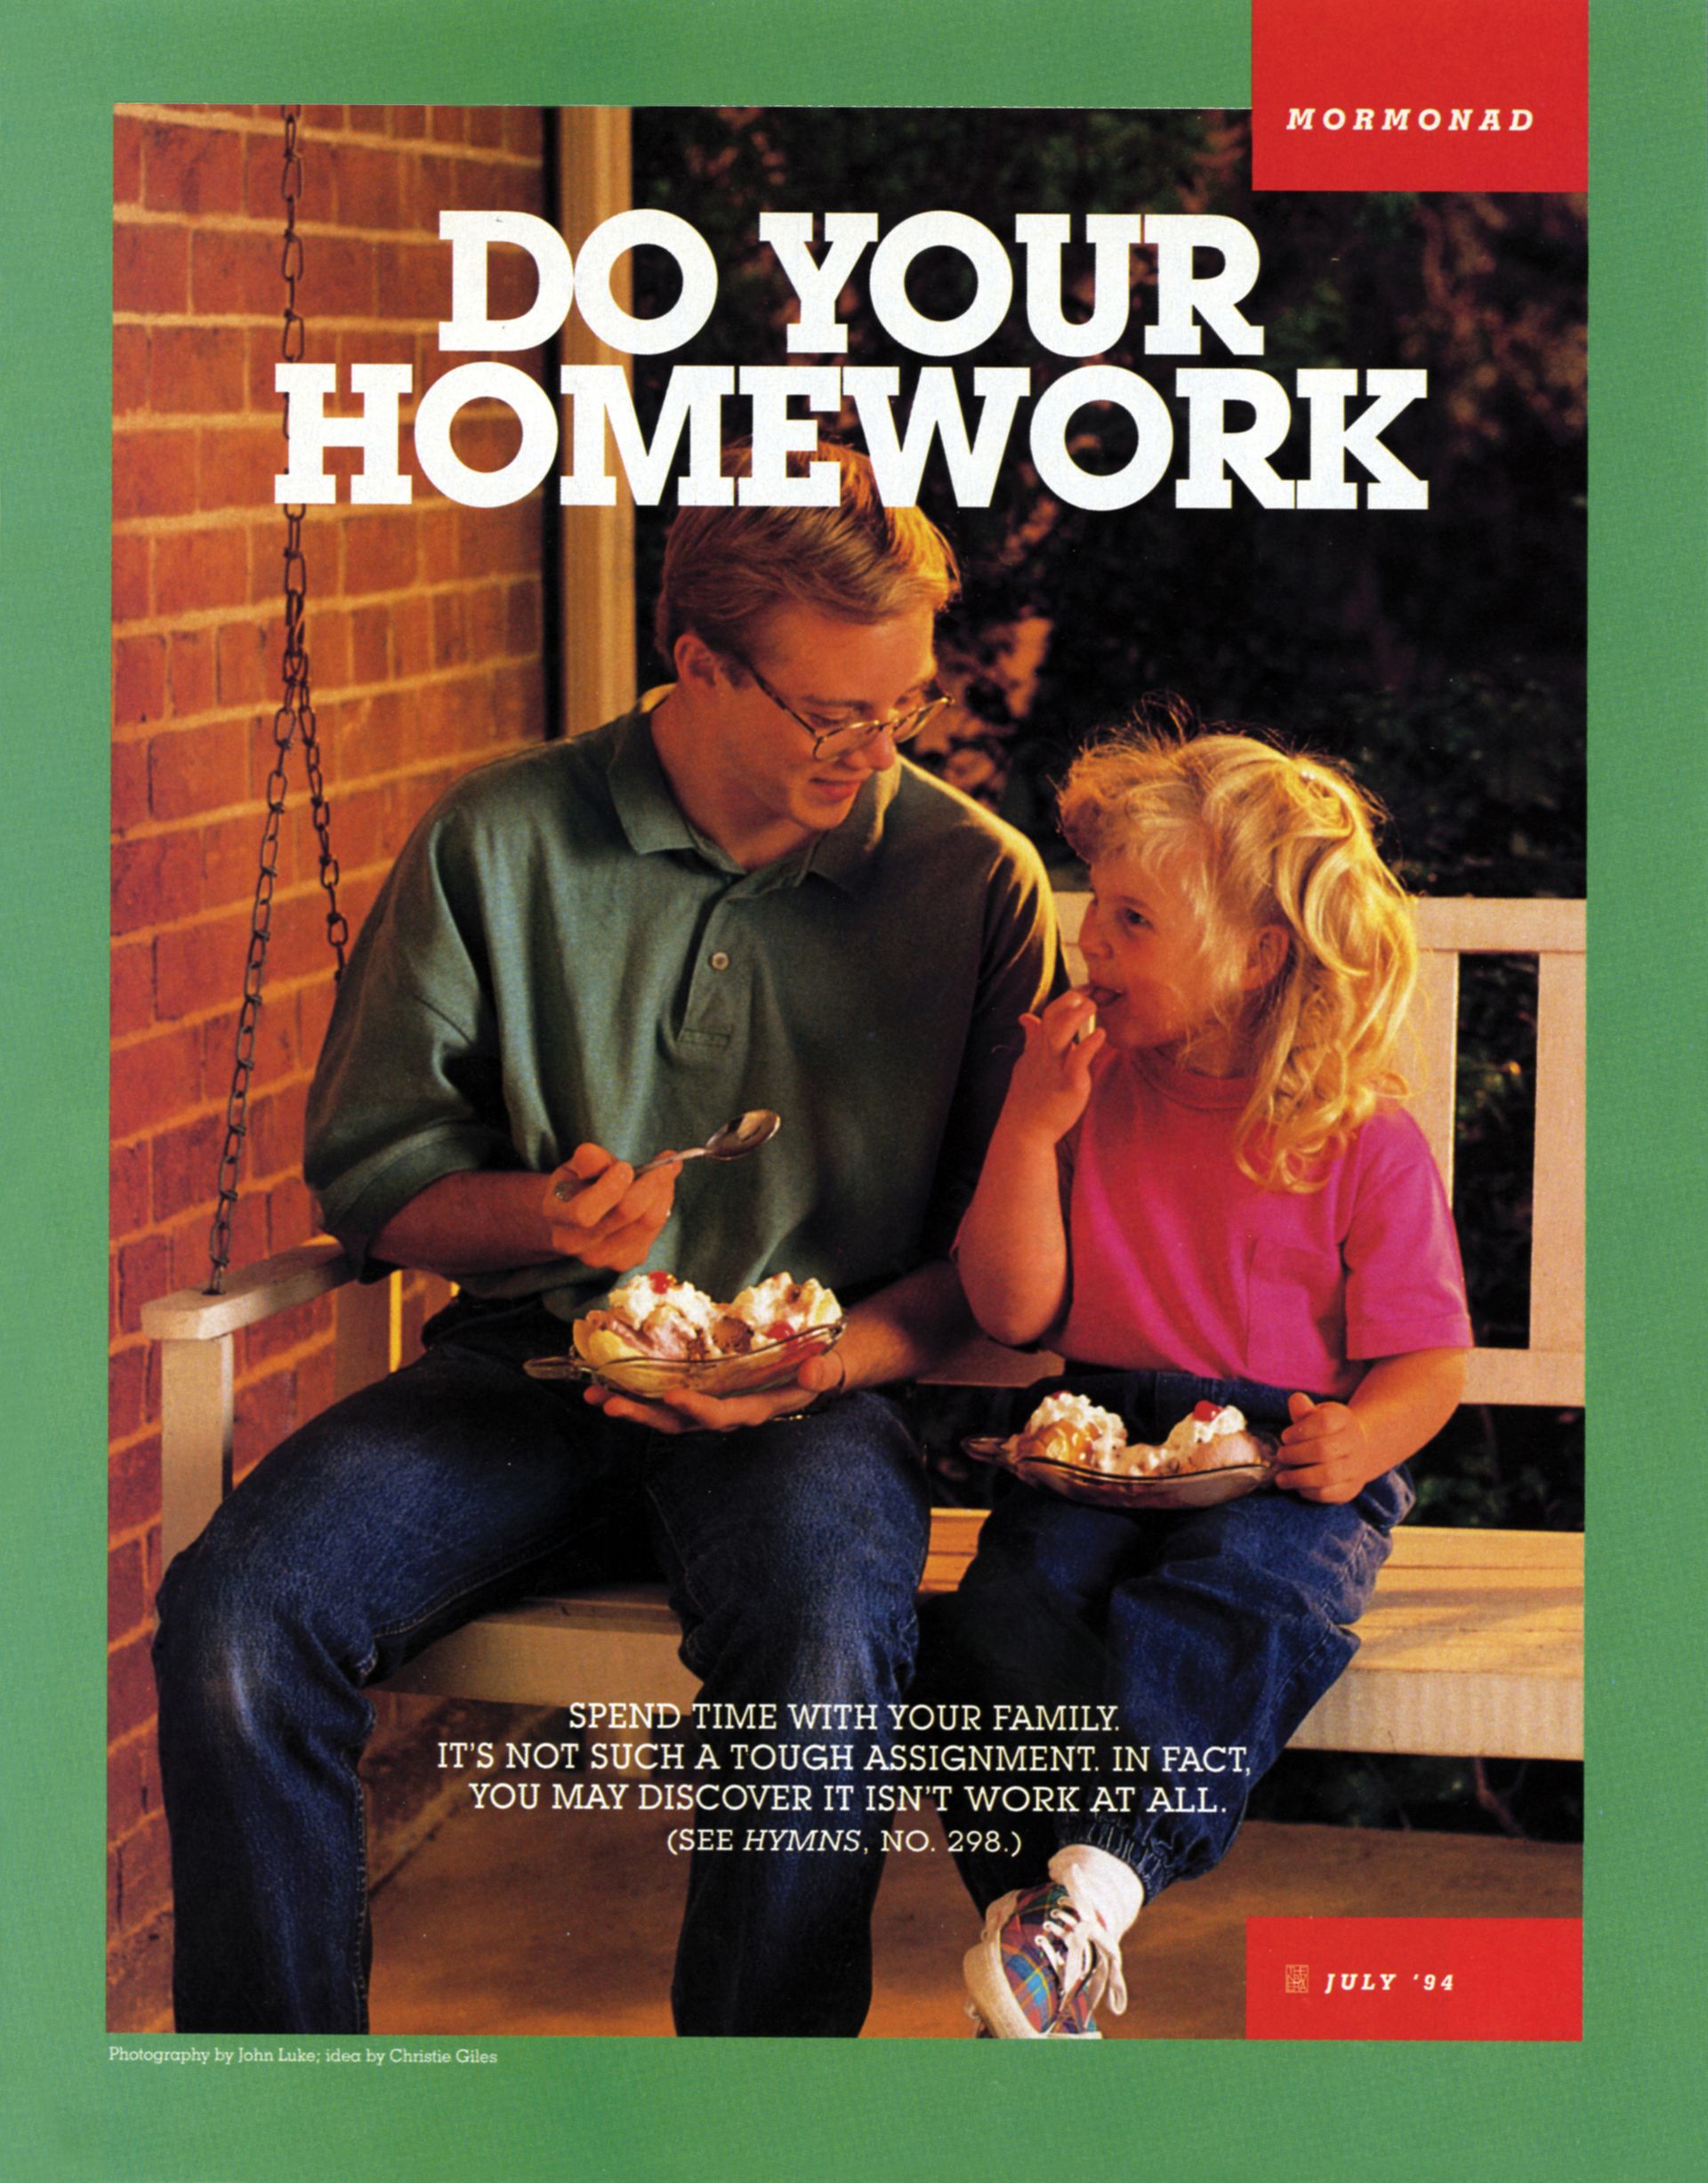 Do Your Homework. Spend time with your family. It’s not such a tough assignment. In fact, you may discover it isn’t work at all. (See Hymns, no. 298.) July 1994 © undefined ipCode 1.